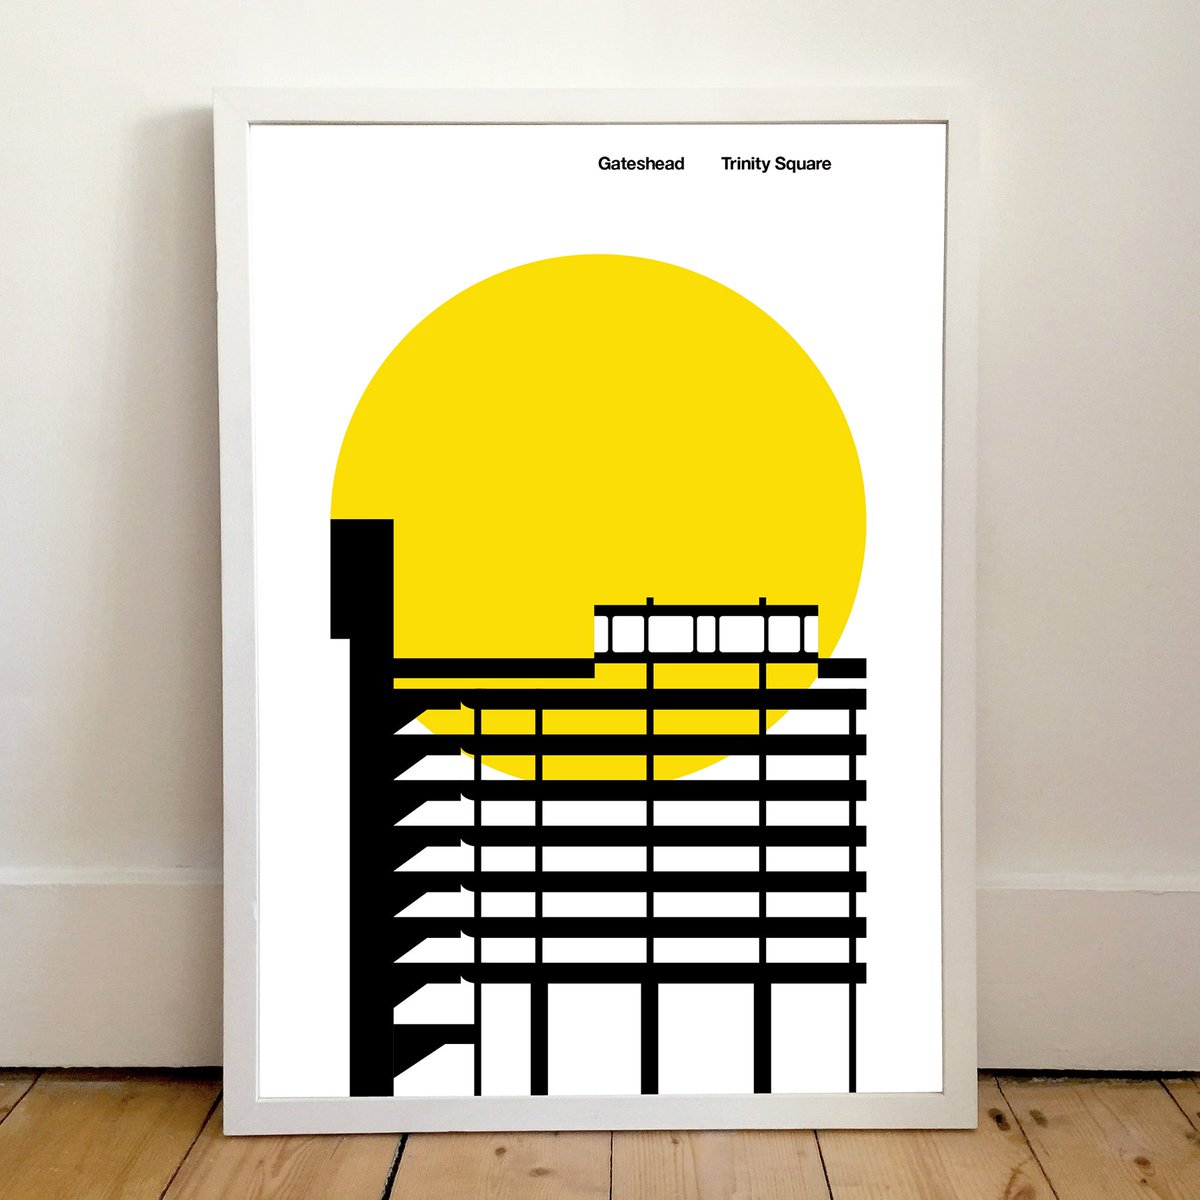 Peter Chadwick's Trinity Square poster